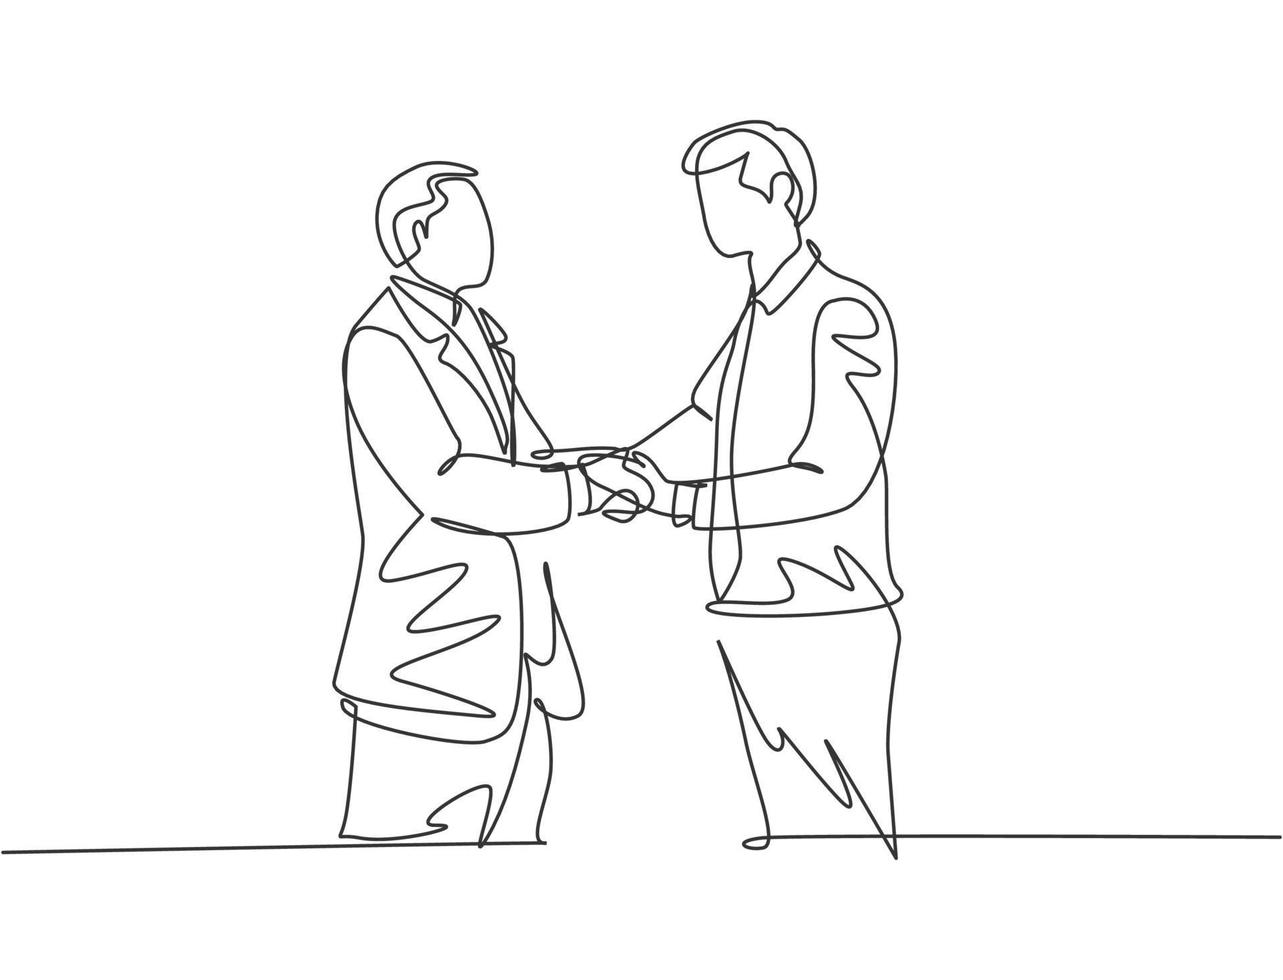 Single line drawing of businessmen handshaking his business partner. Great teamwork. Business deal concept with continuous line draw style vector graphic illustration